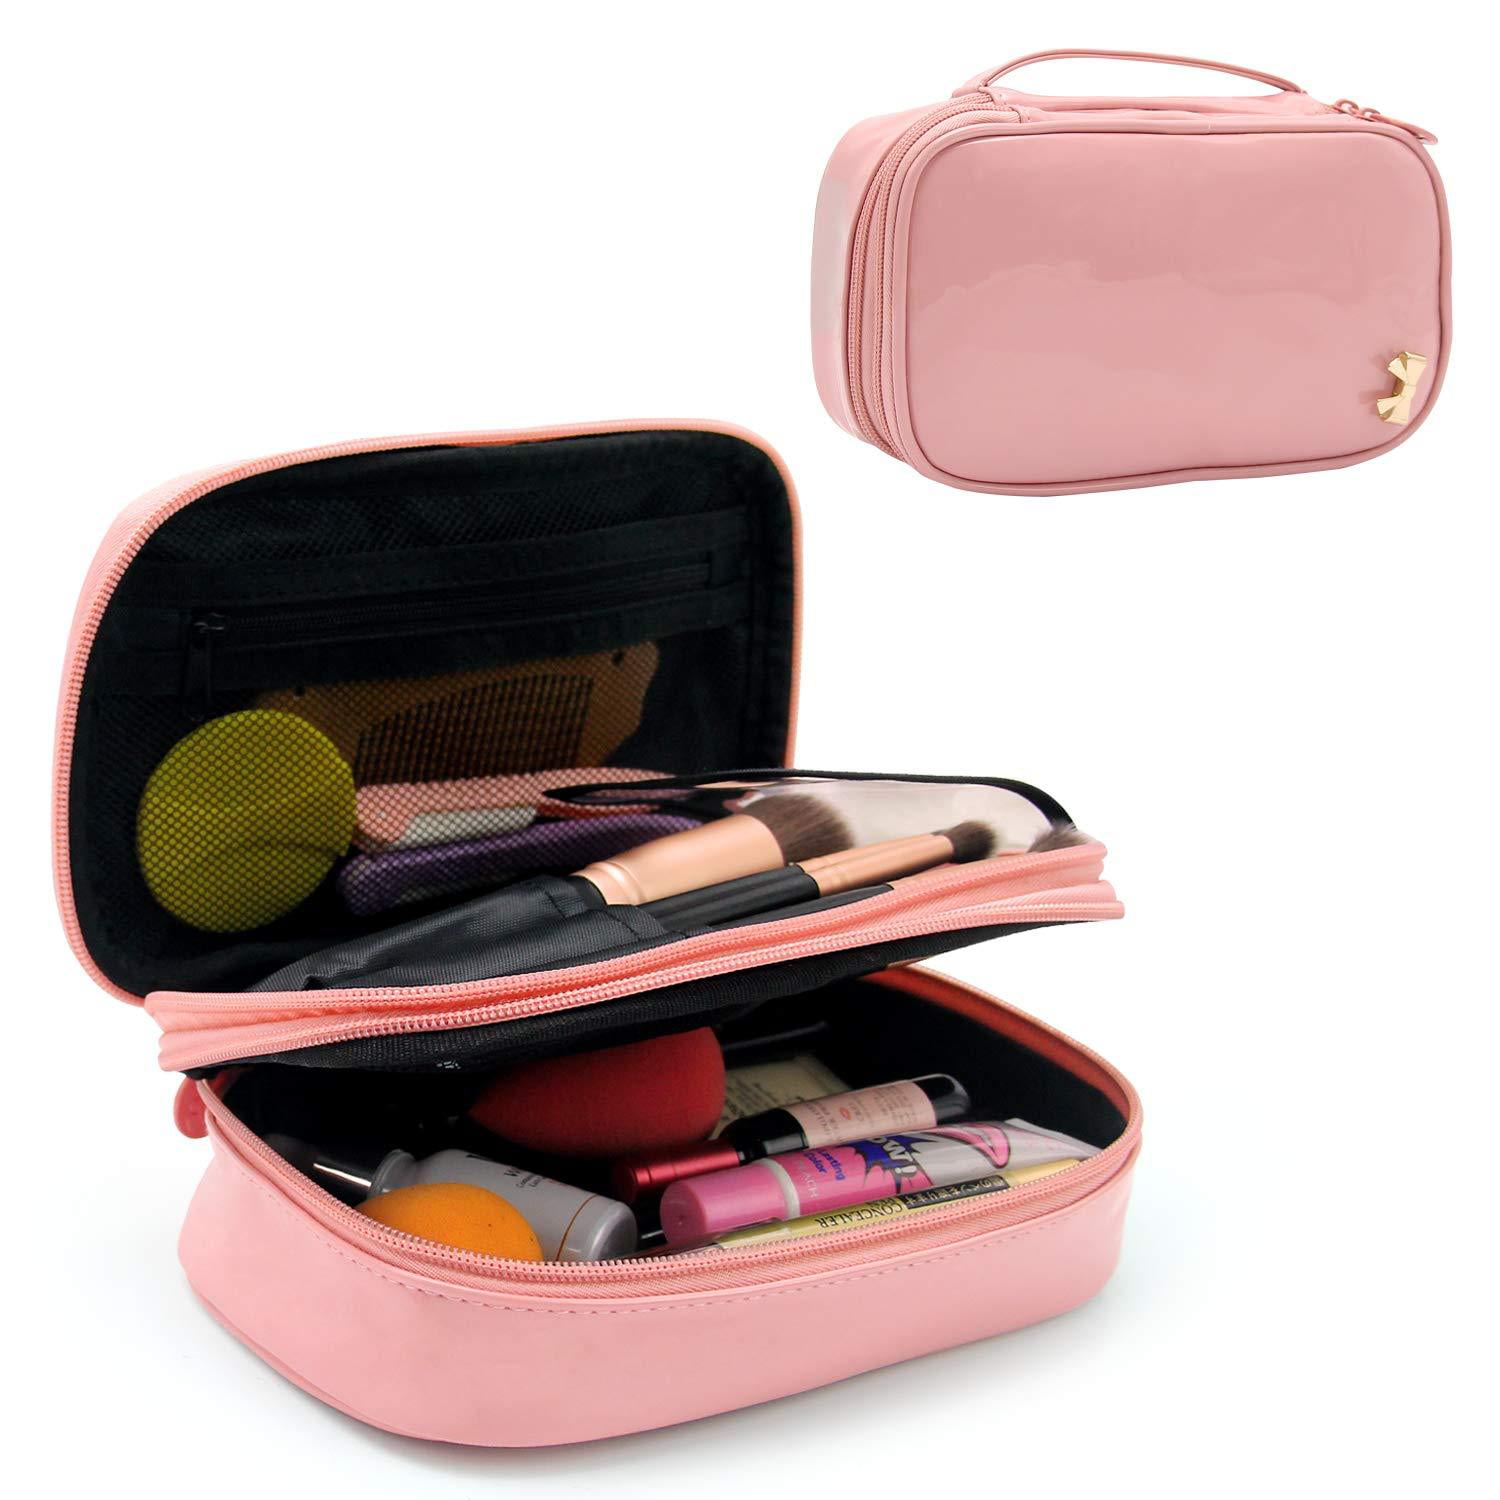 Relavel Makeup Organizer, Waterproof Small Makeup Bags, 2-layer Cosmetic  Bag, Compact Pouch with Makeup Brush Holder, Toiletry Bag for Women, PU